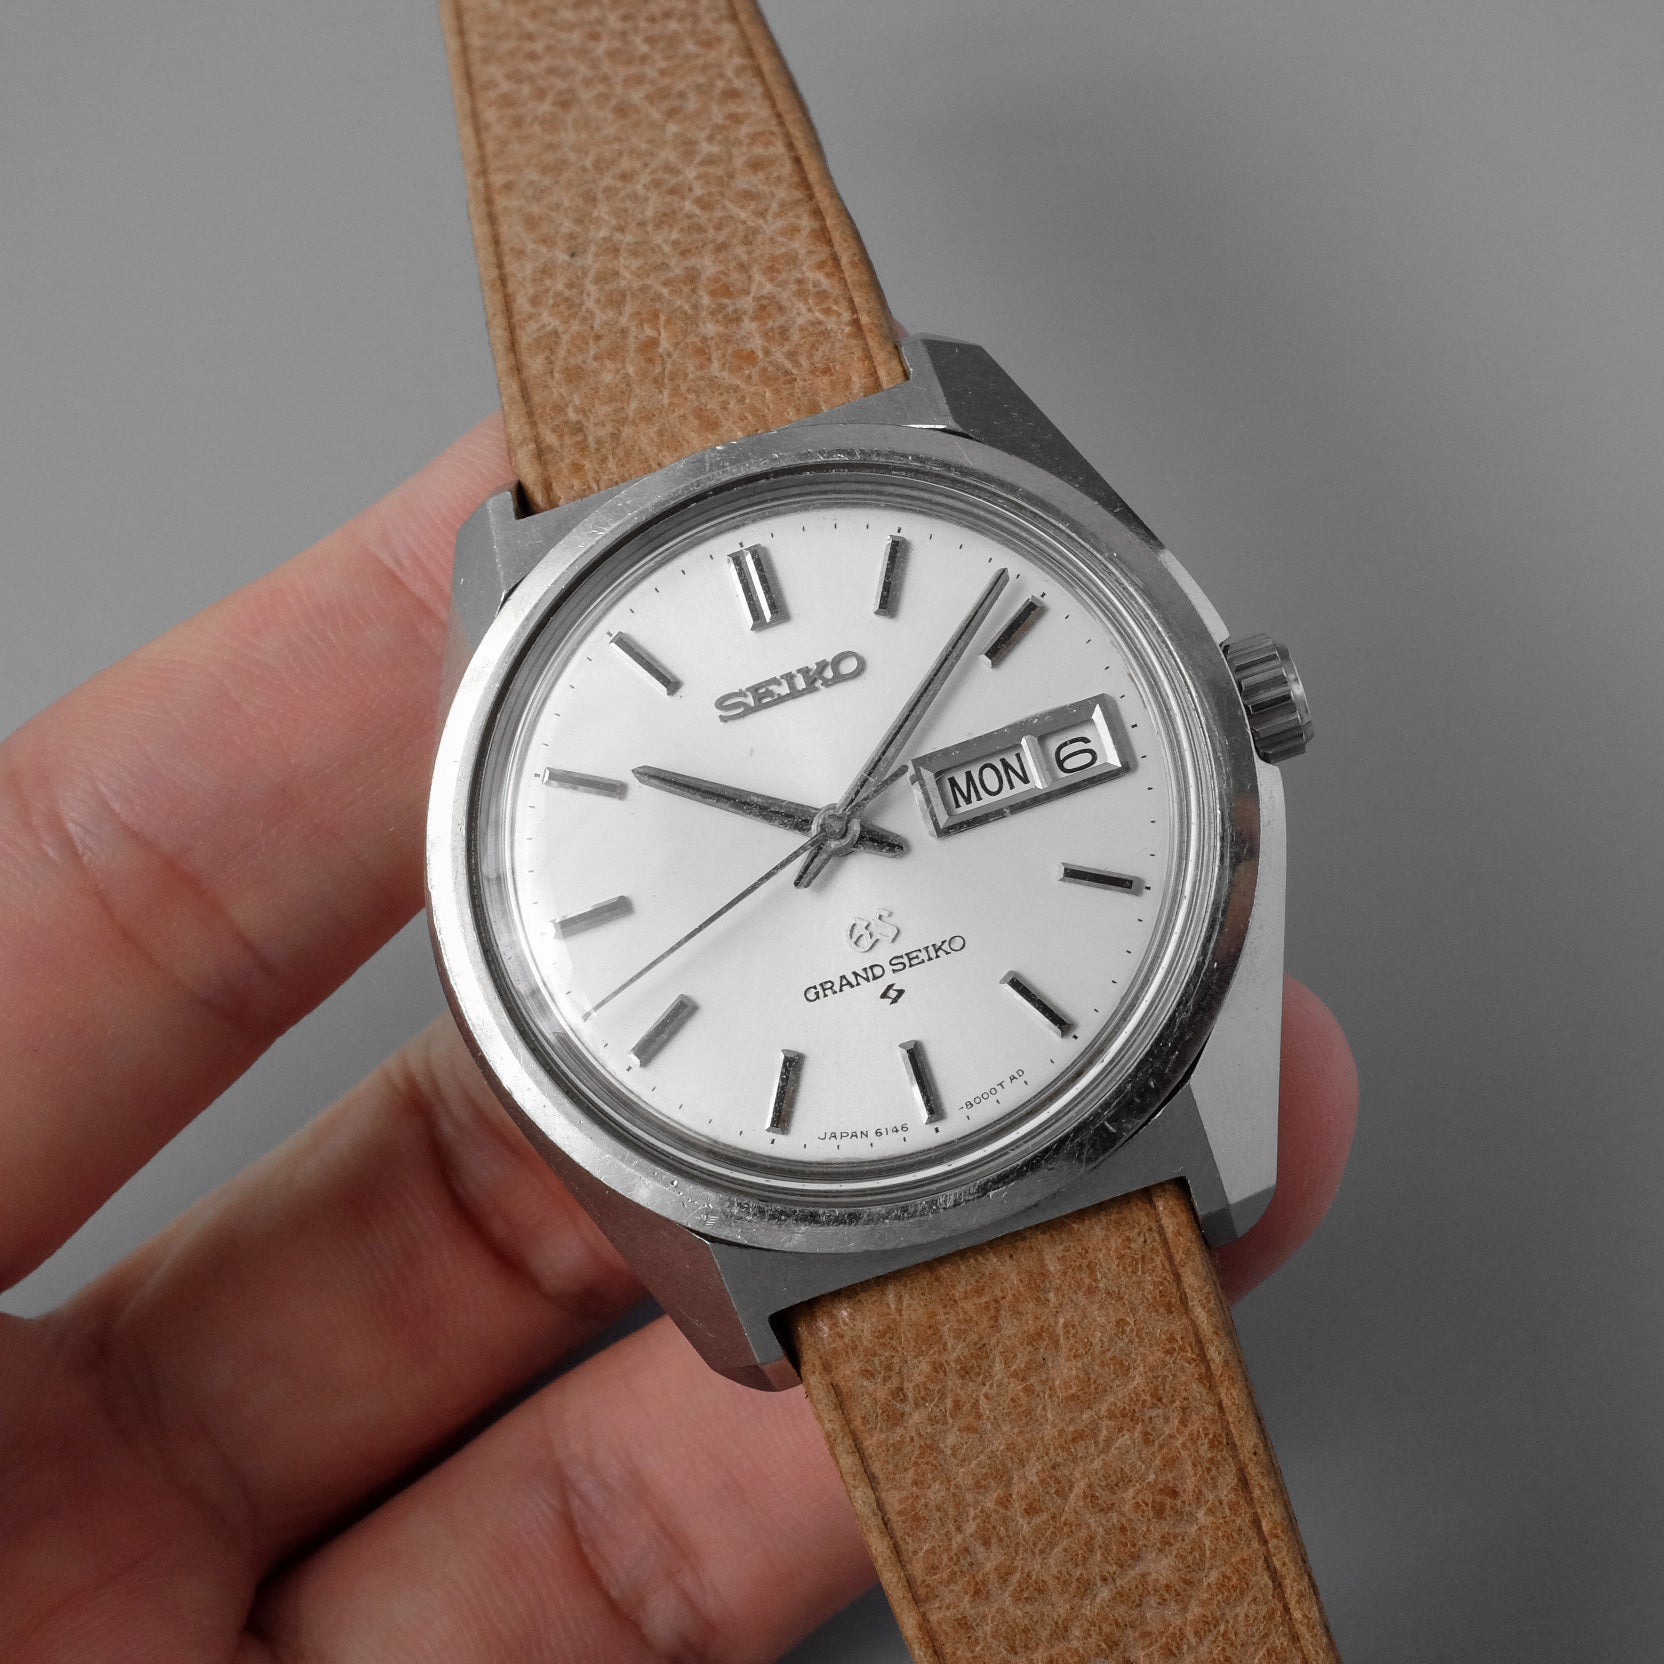 Grand Seiko 6146-8000 from 1967 (Early Variant)